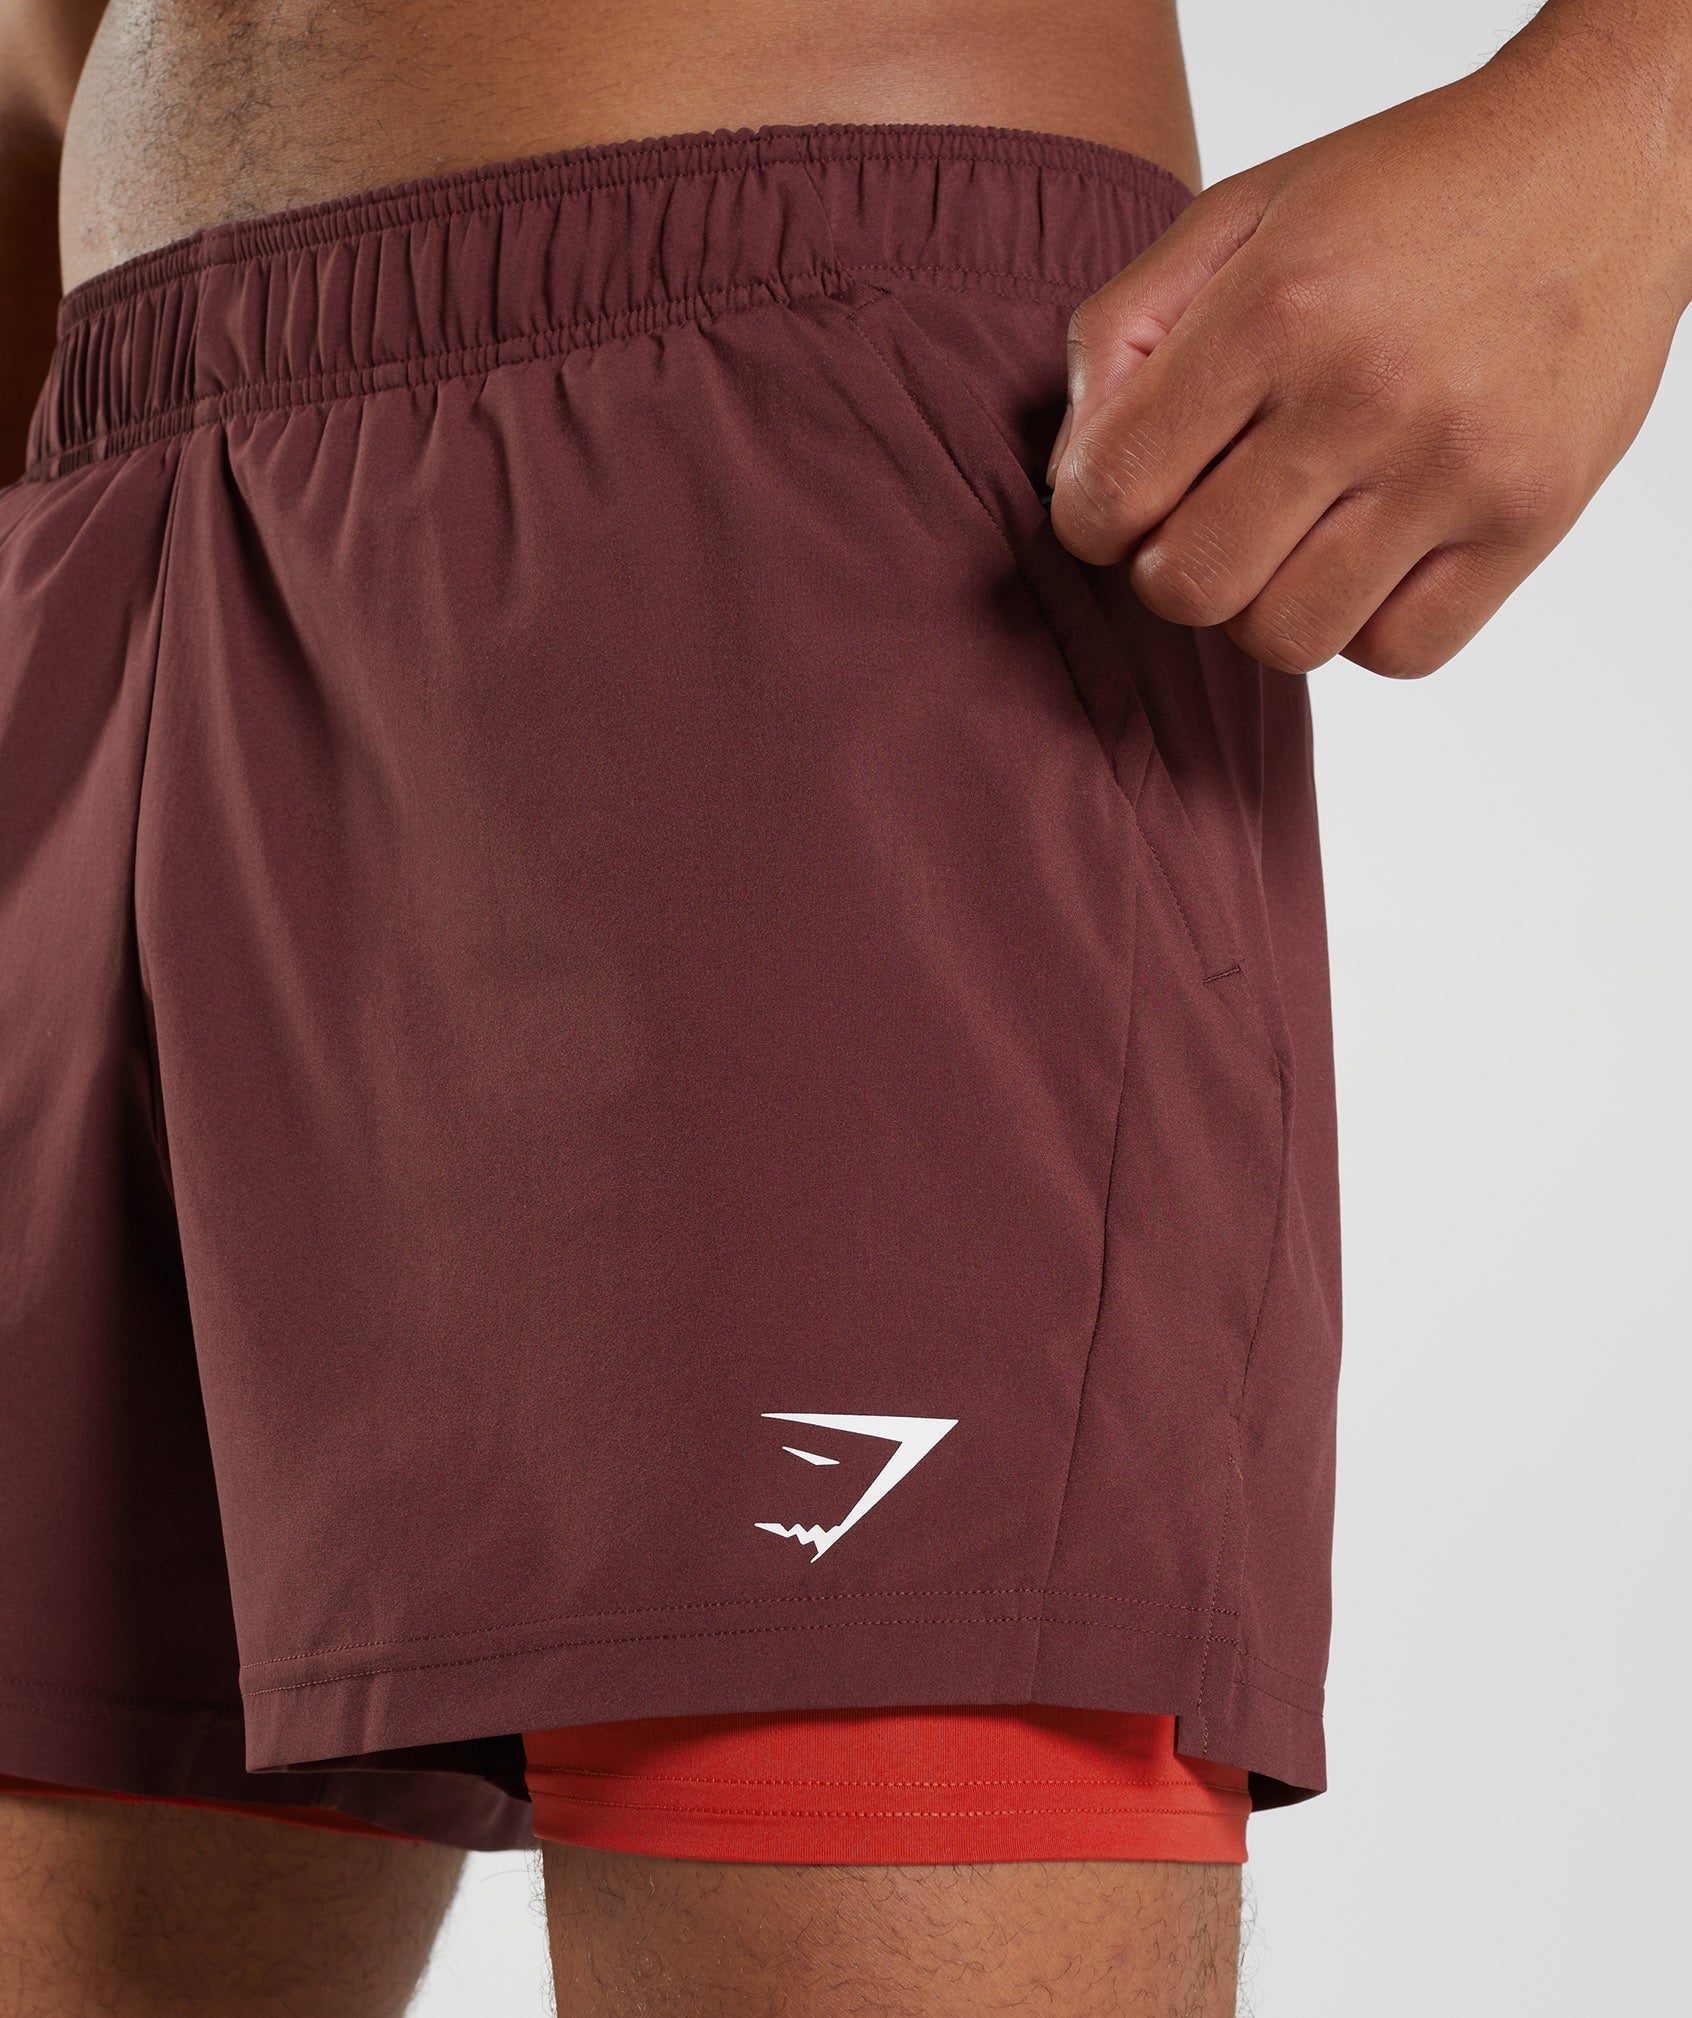 Gymshark Sport 5 2 In 1 Shorts - Baked Maroon/Salsa Red